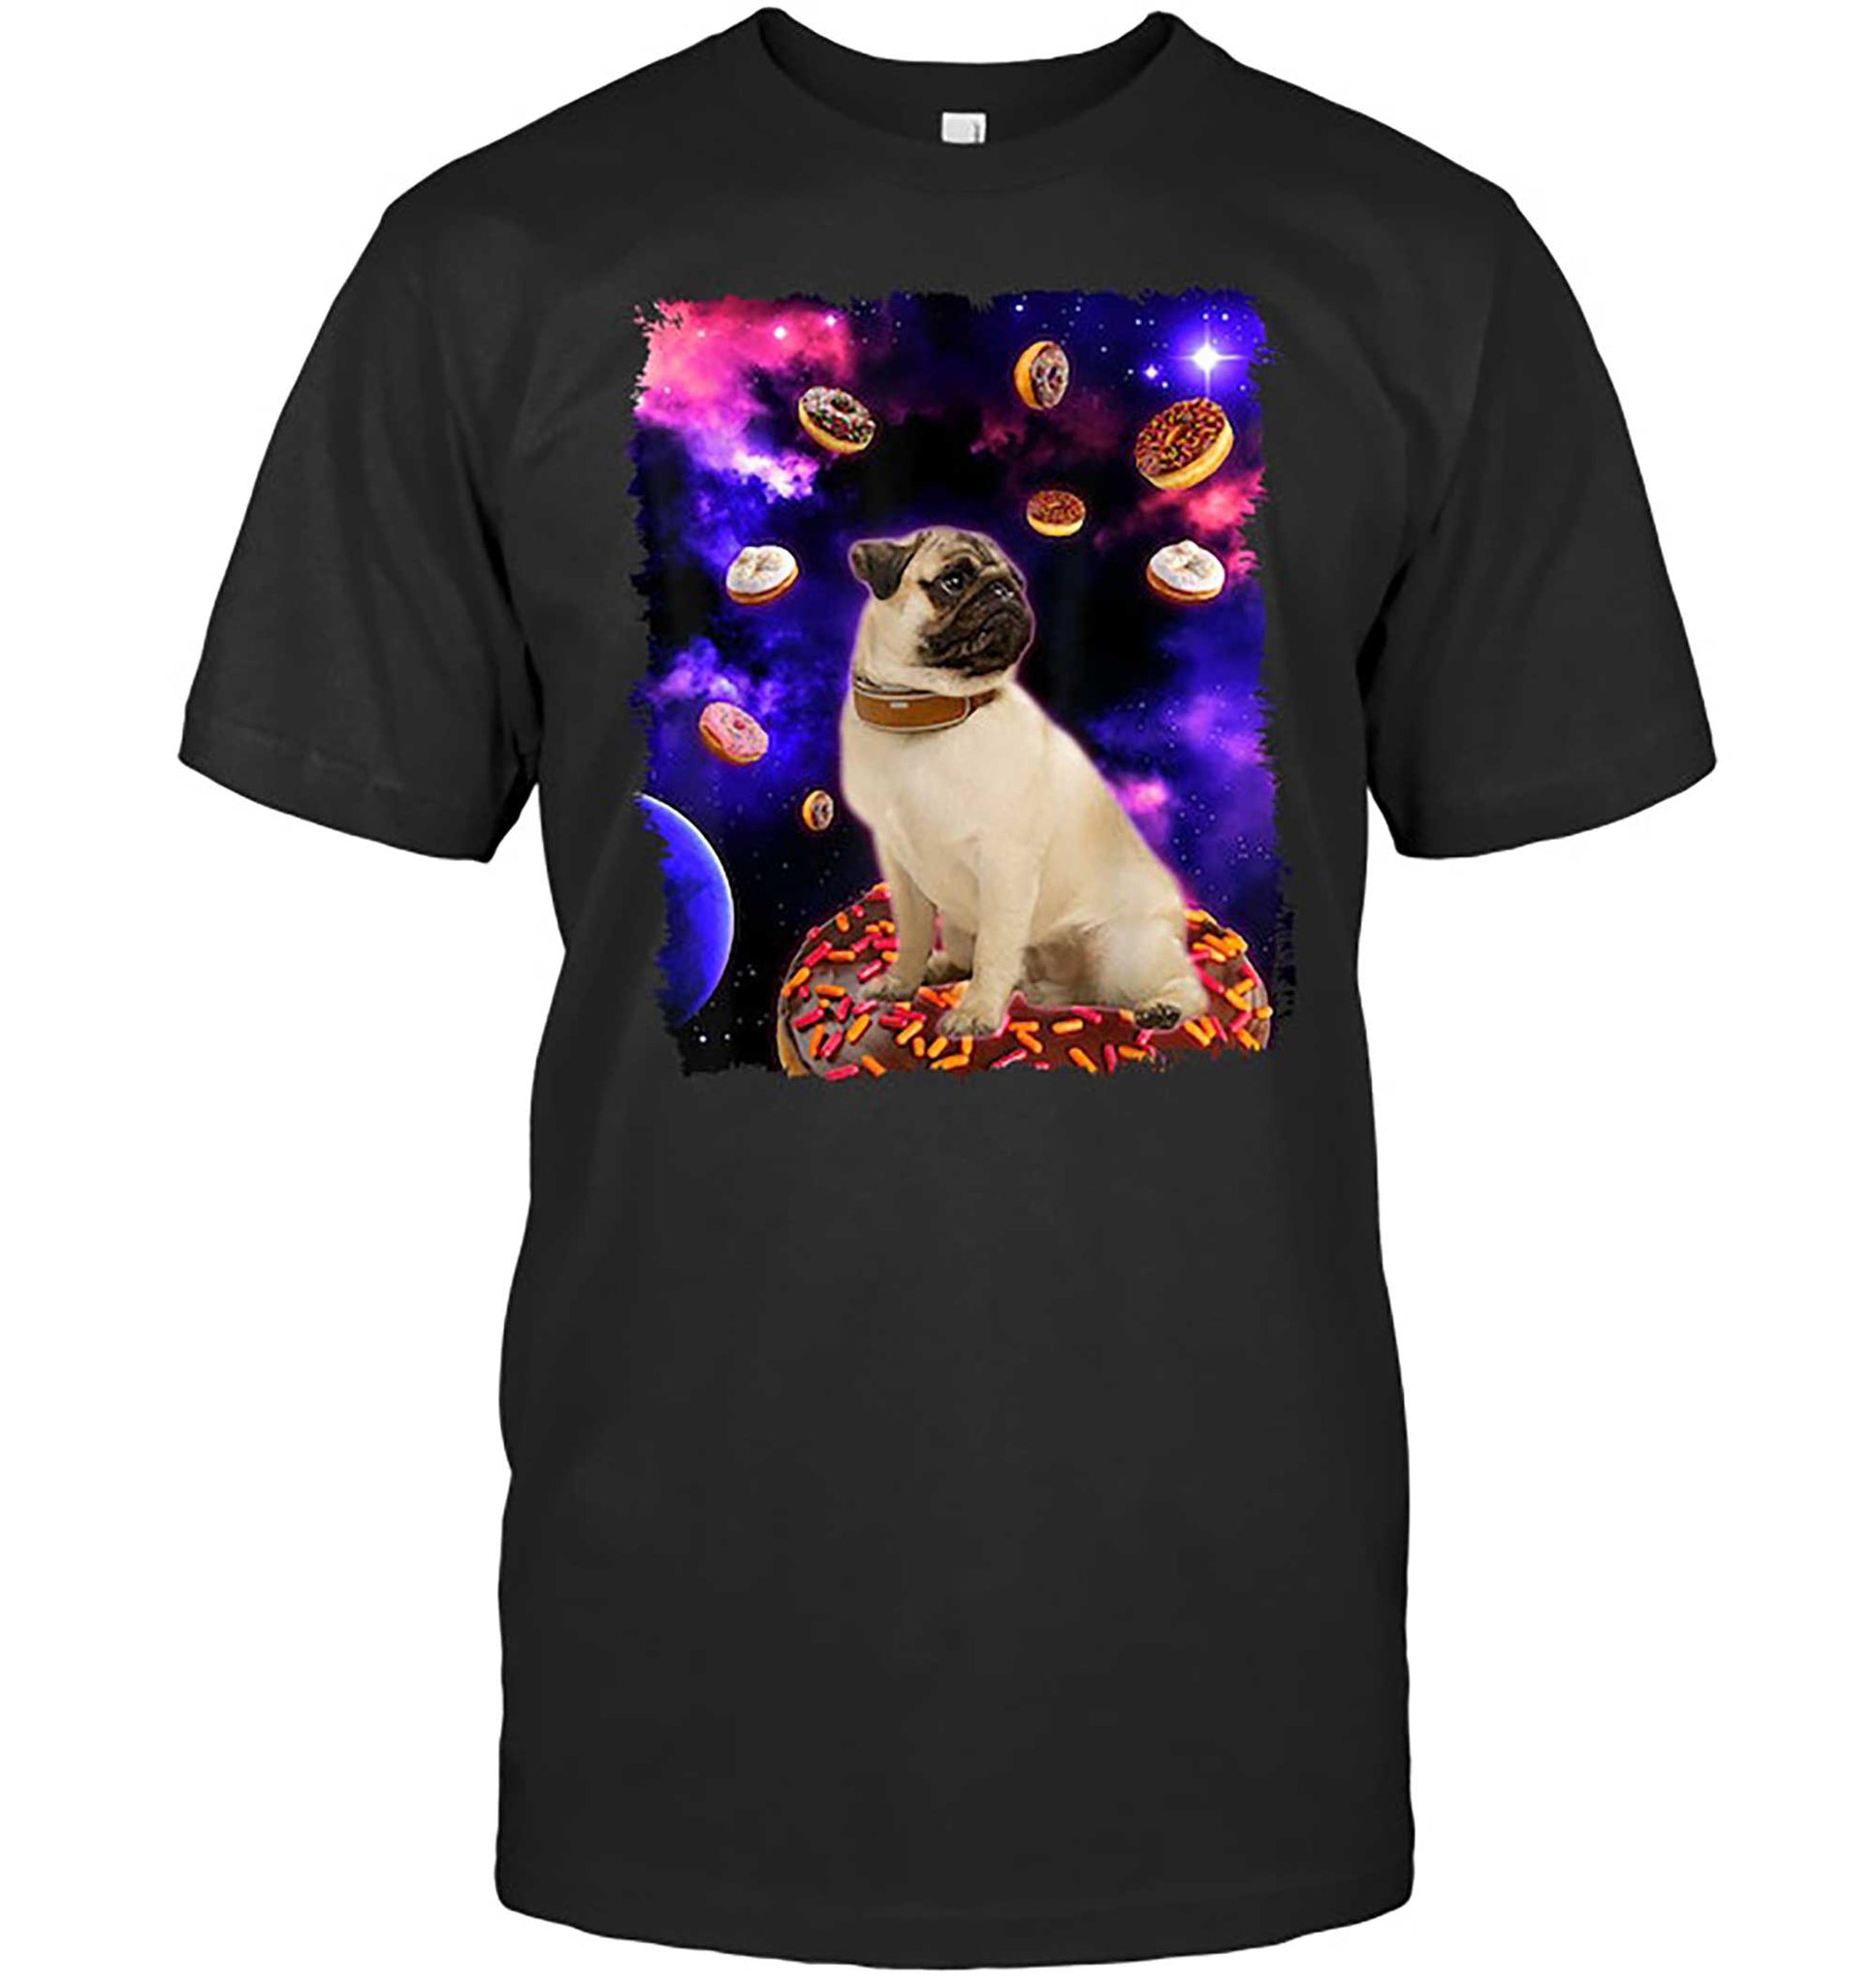 Skitongift-Adorable-Pug-In-Space-With-Doughnuts-Pug-Dog-Gifts-T-Shirt-Funny-Shirts-Hoodie-Sweater-Short-Sleeve-Casual-Shirt